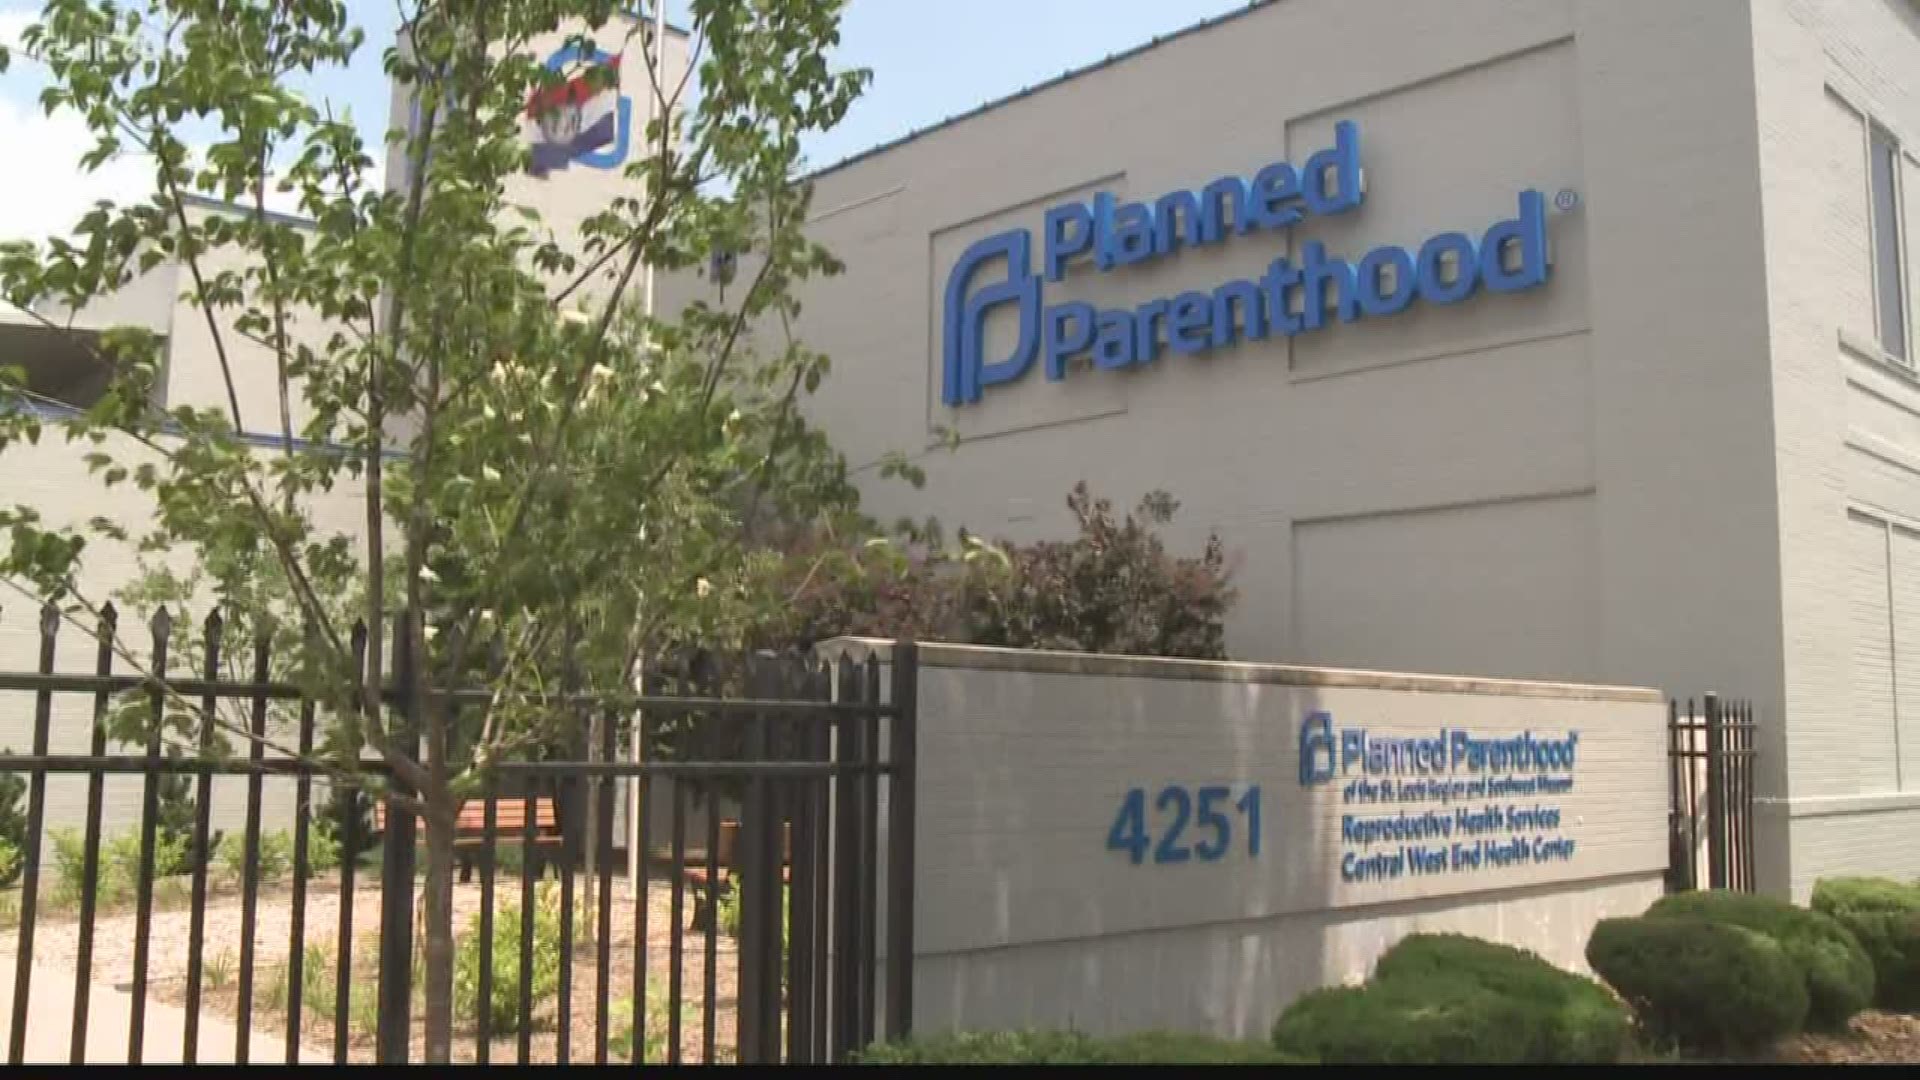 A hearing beginning Monday will determine if the Planned Parenthood in St. Louis can stay open.
This comes after the state denied the clinic a license.